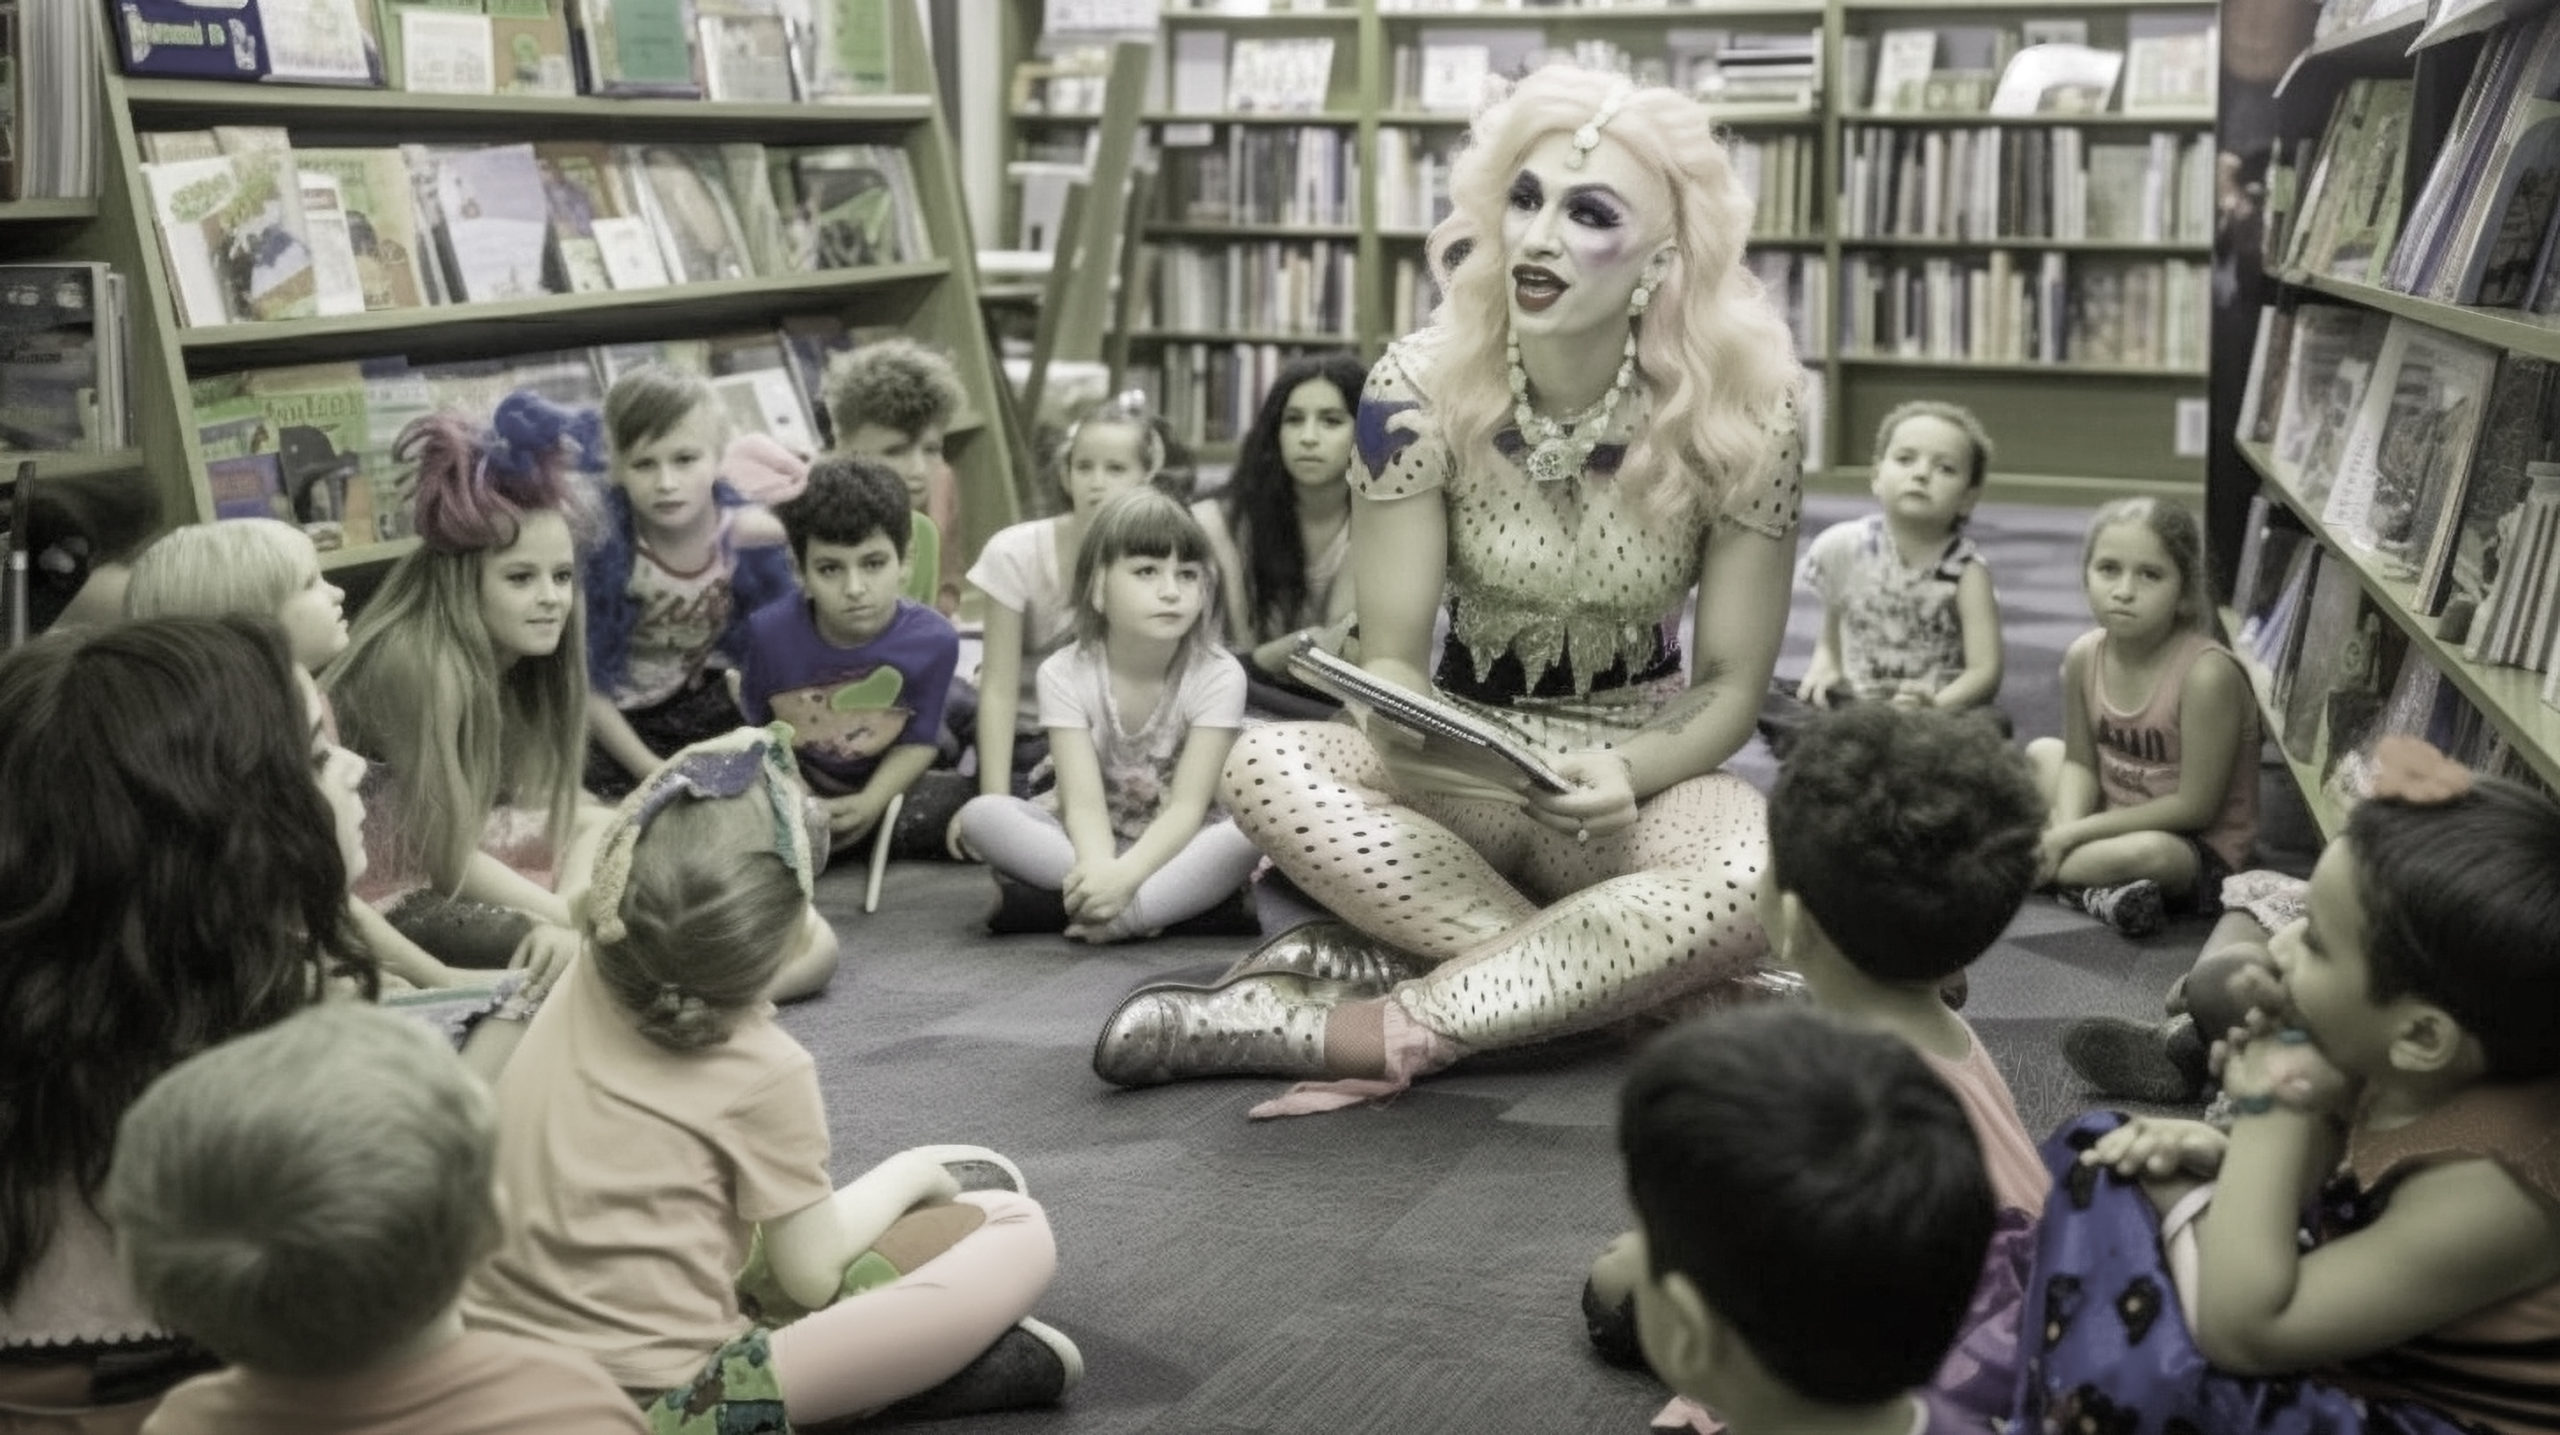 Protect Children from Drag Shows